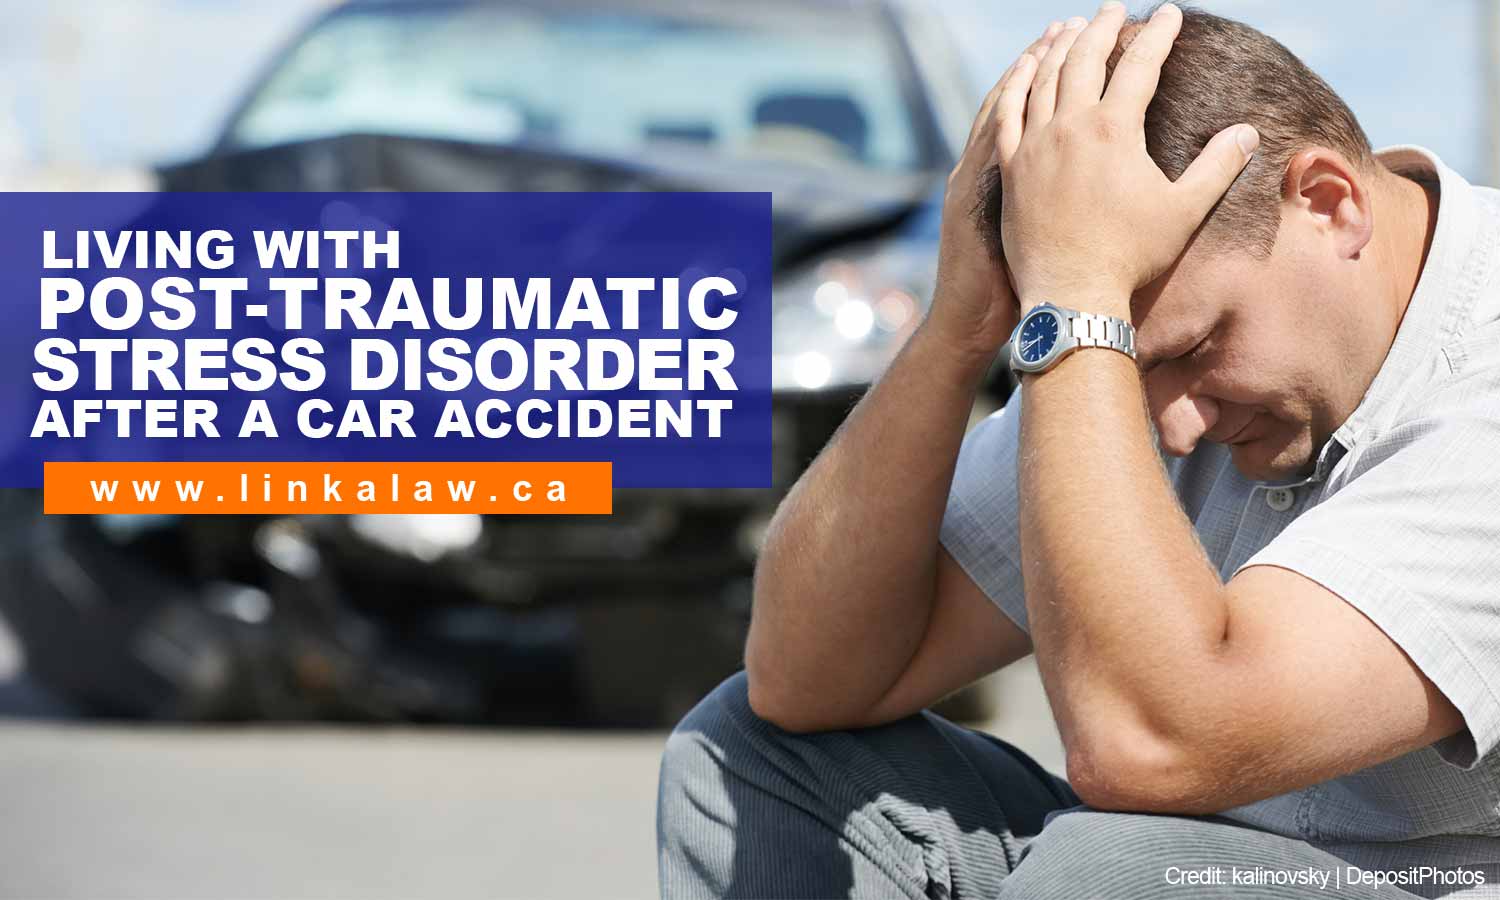 Living With Post-Traumatic Stress Disorder After a Car Accident